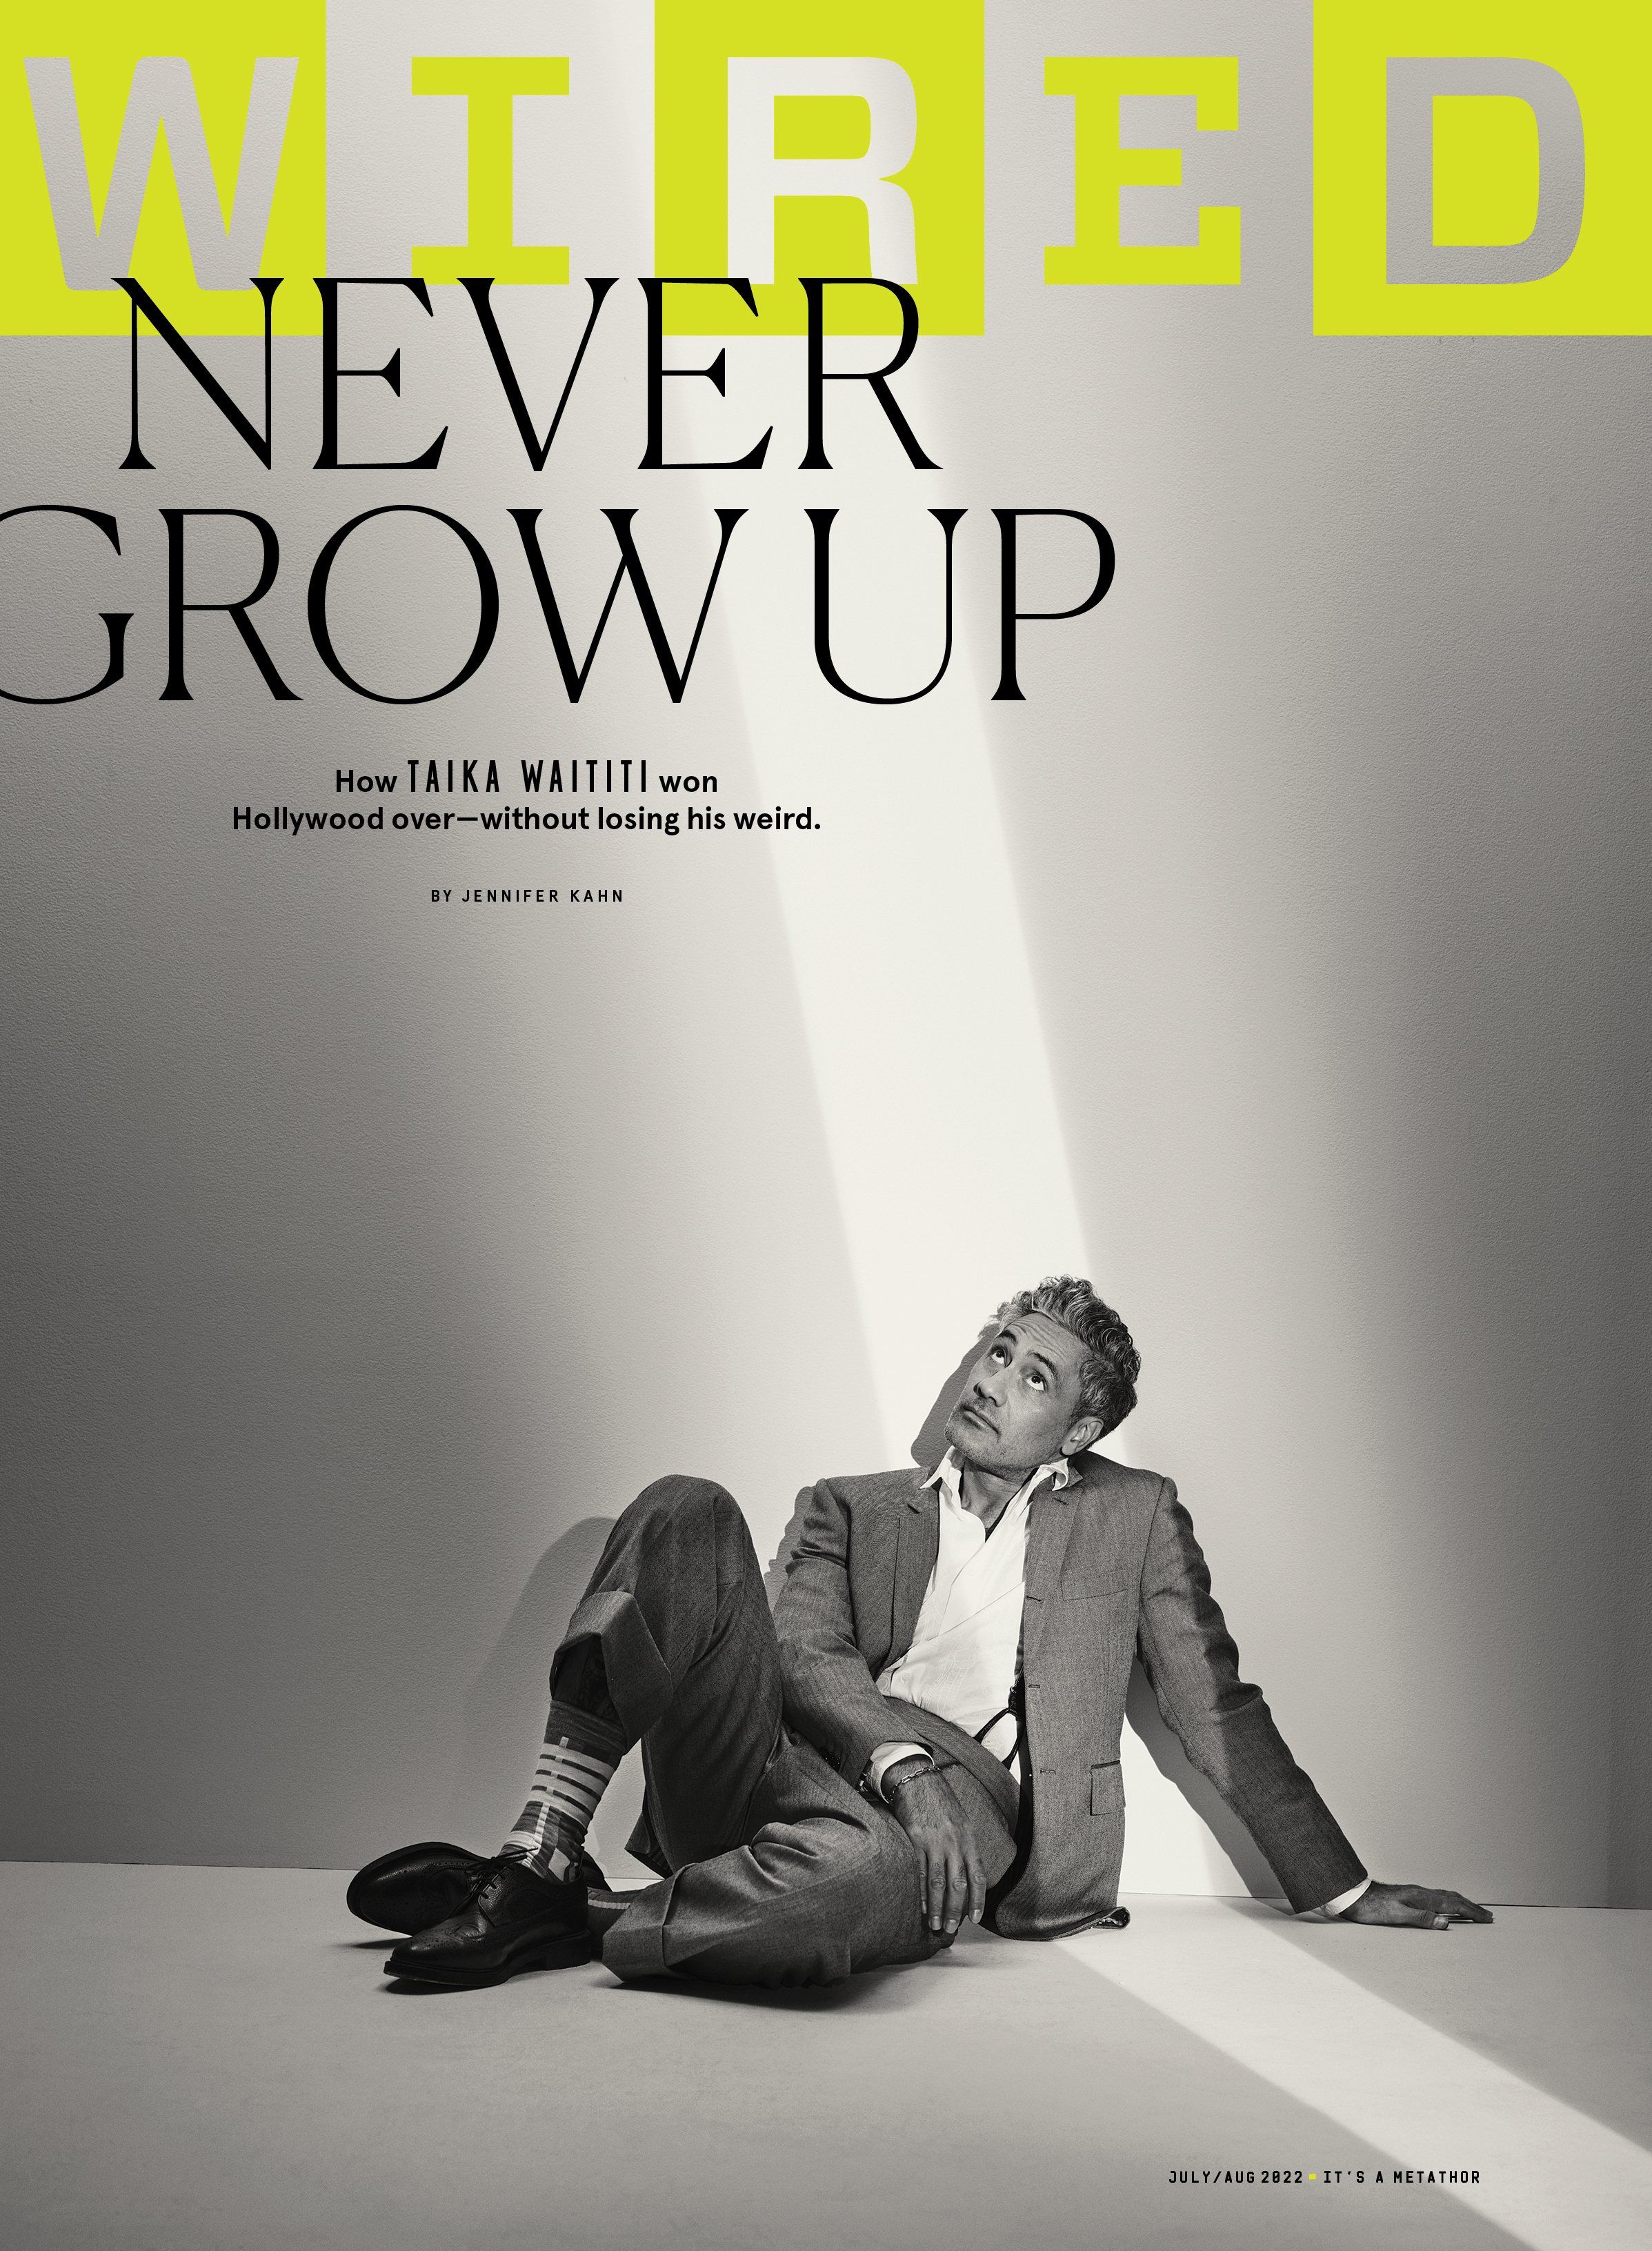 WIRED - “Never Grow Up” July/August 2022